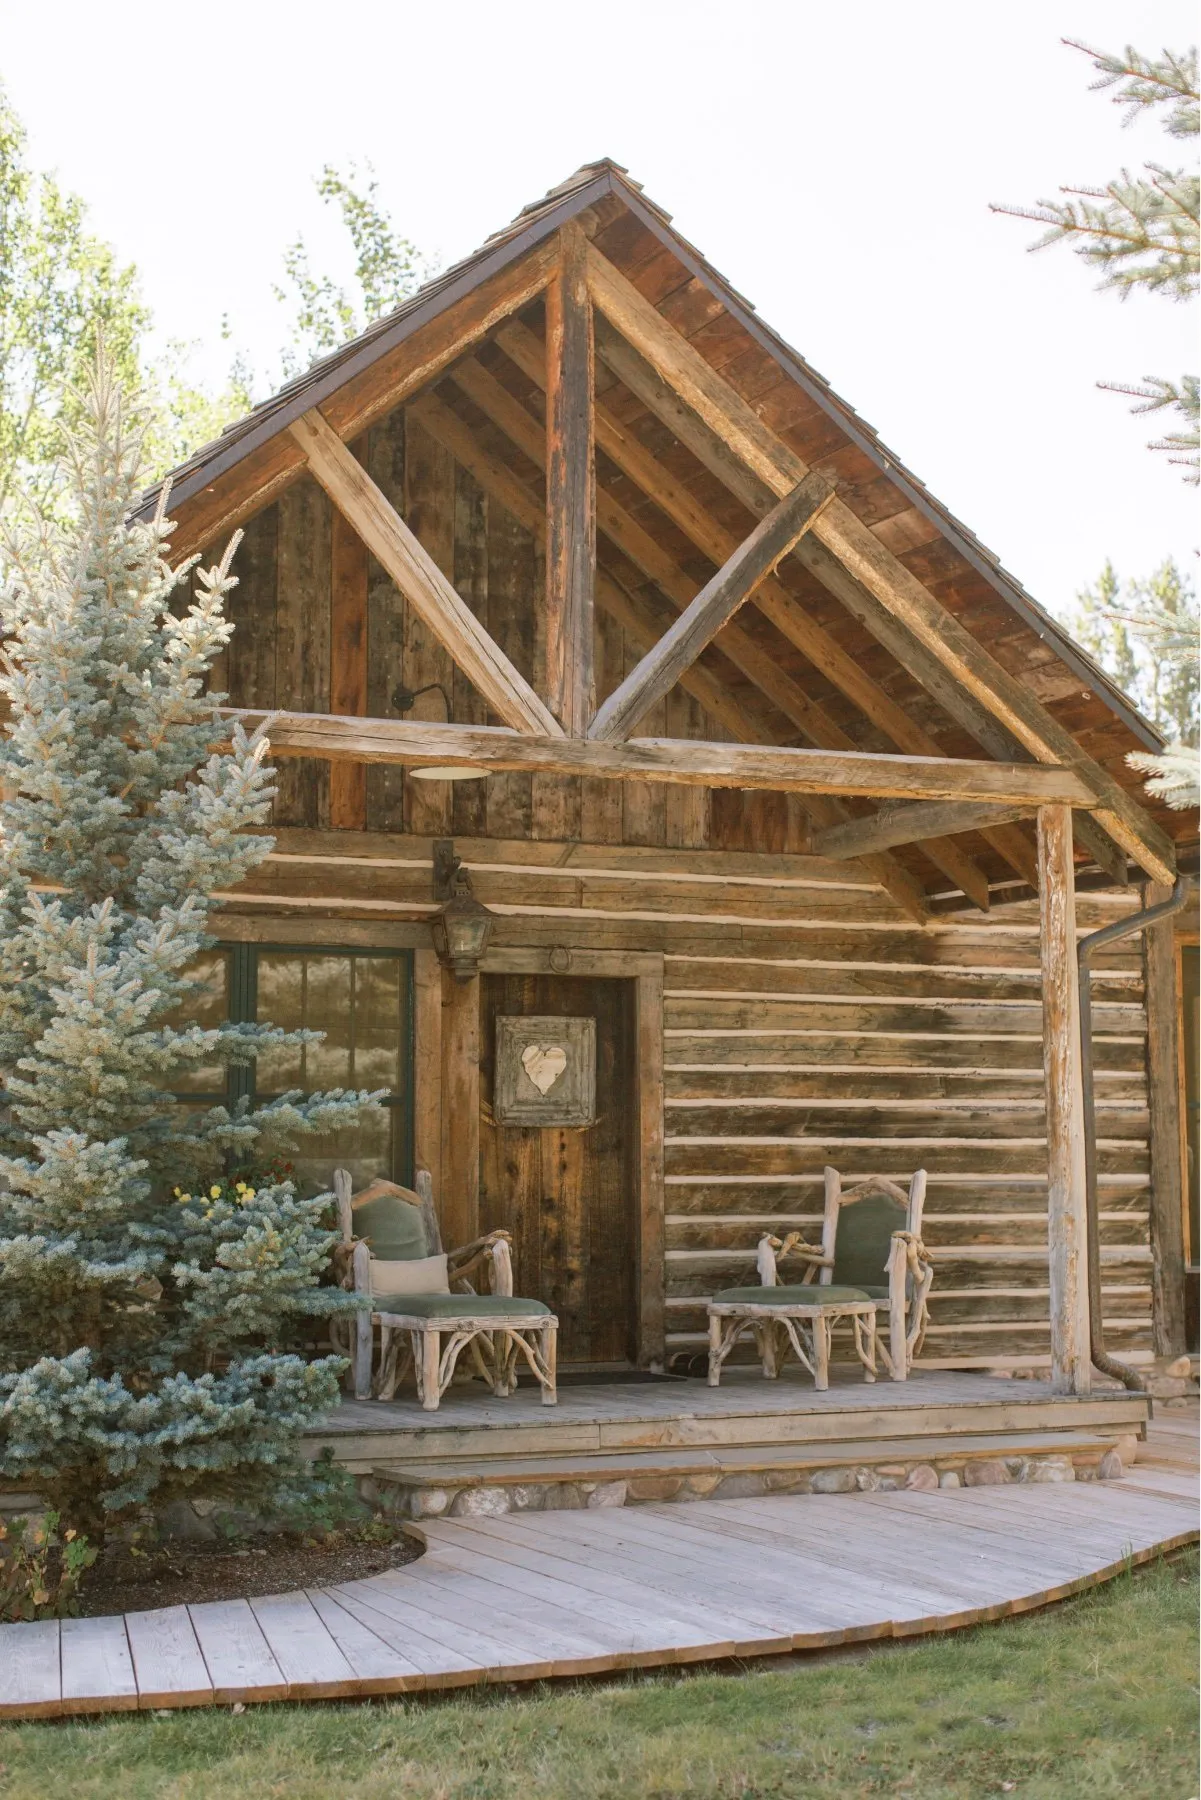 A wooden cabin